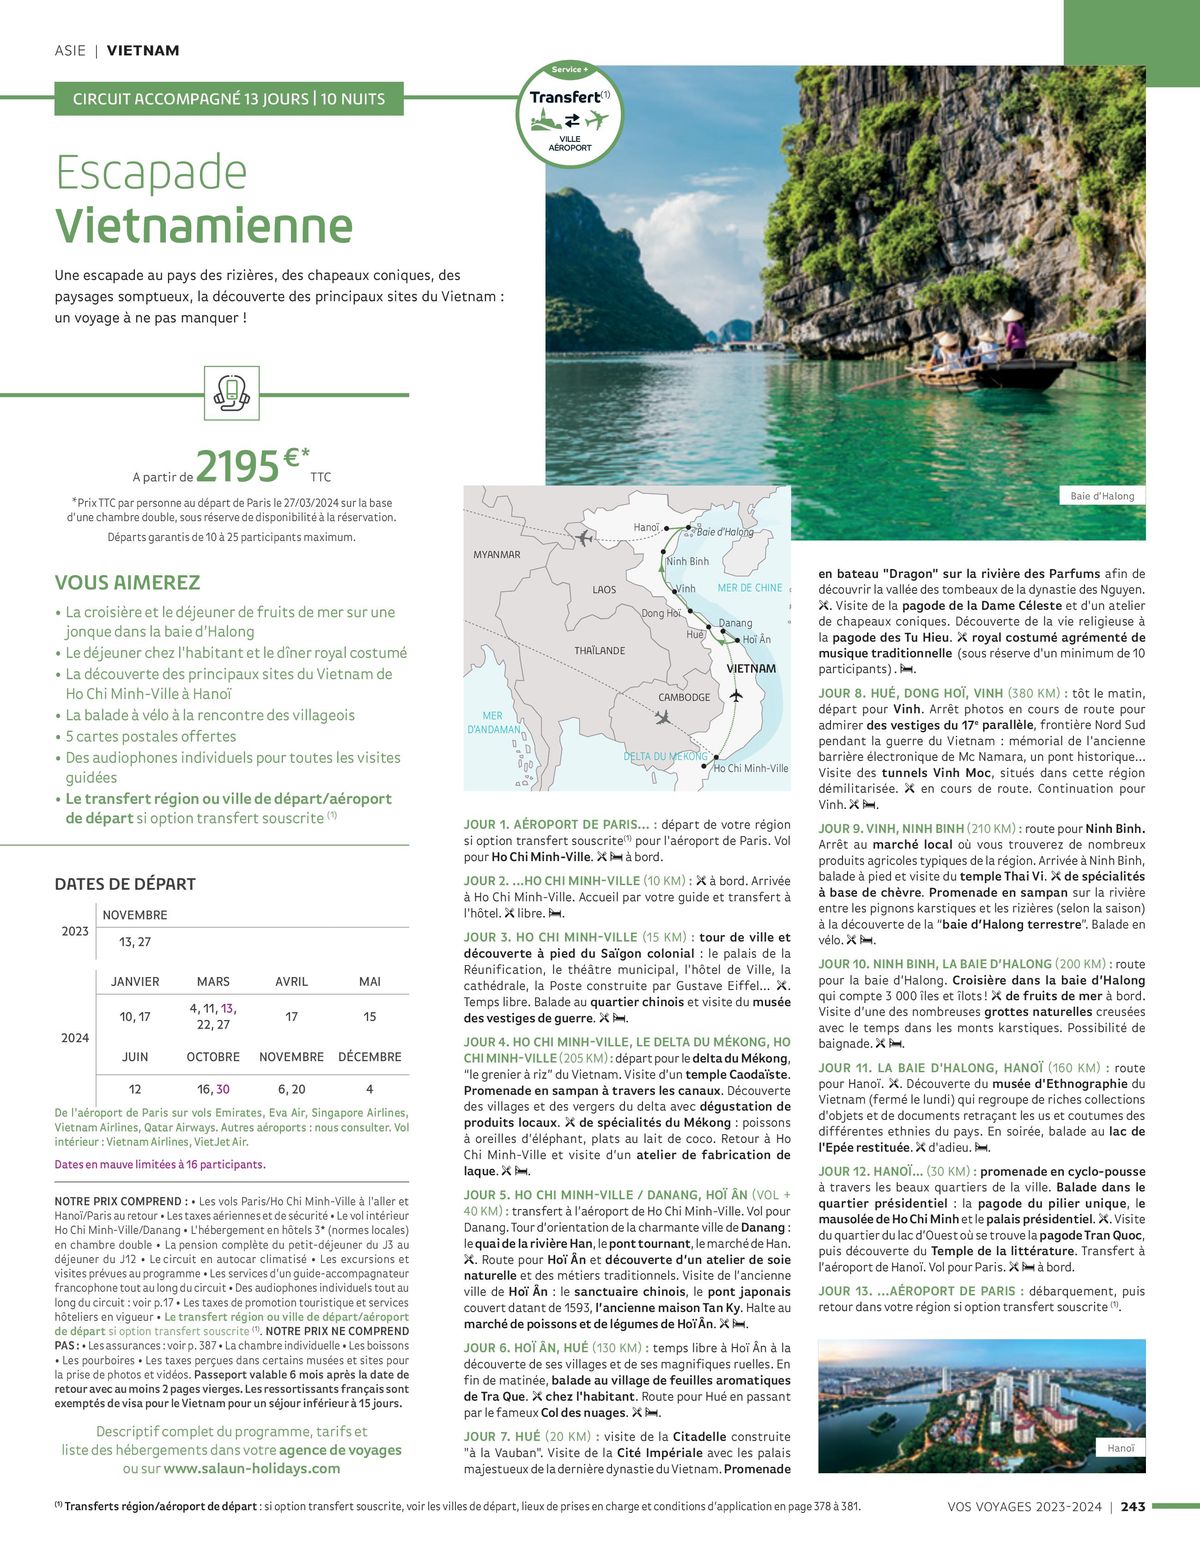 Catalogue Vos voyages 2023-2024, page 00243